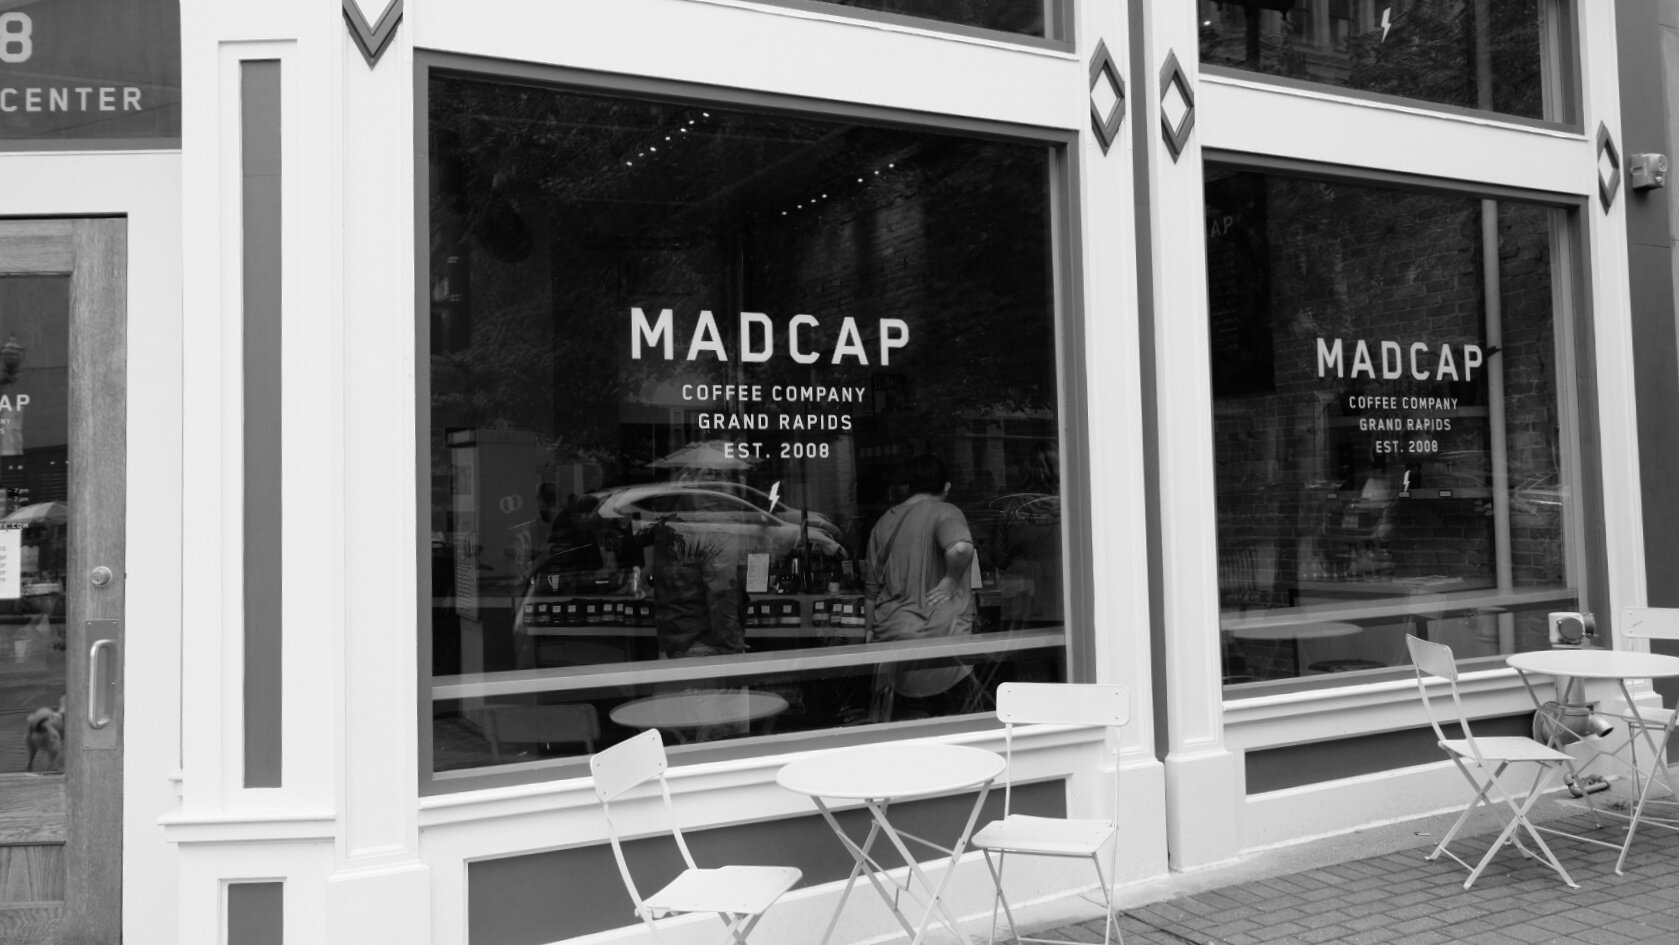 The exterior of Madcap Coffee in Grand Rapids, Michigan, showing glass windows with their logo and white outdoor tables and chairs in front